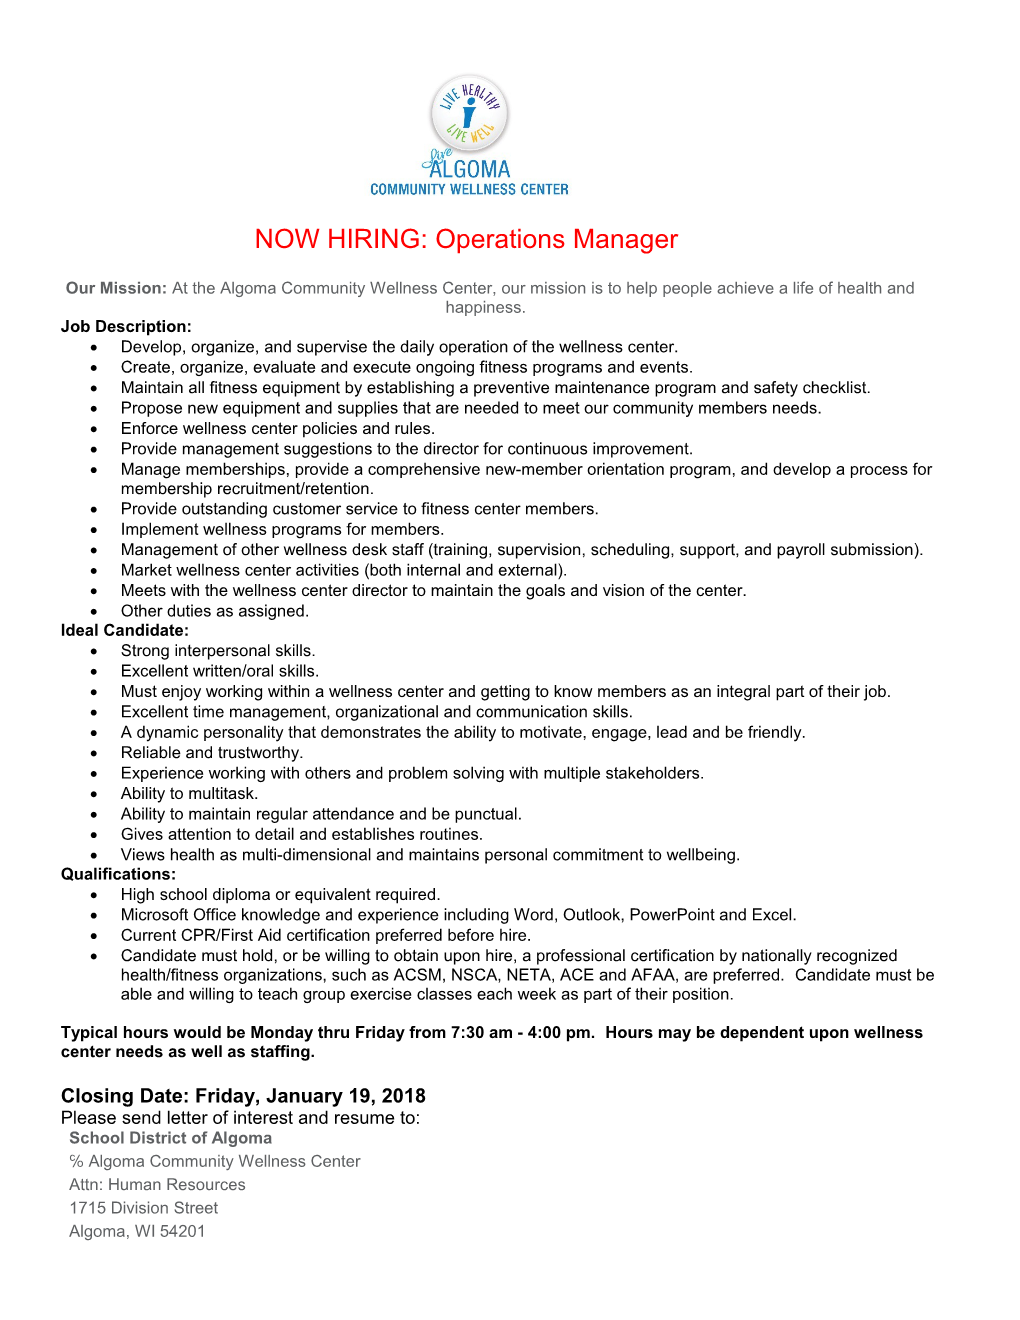 NOW HIRING: Operations Manager